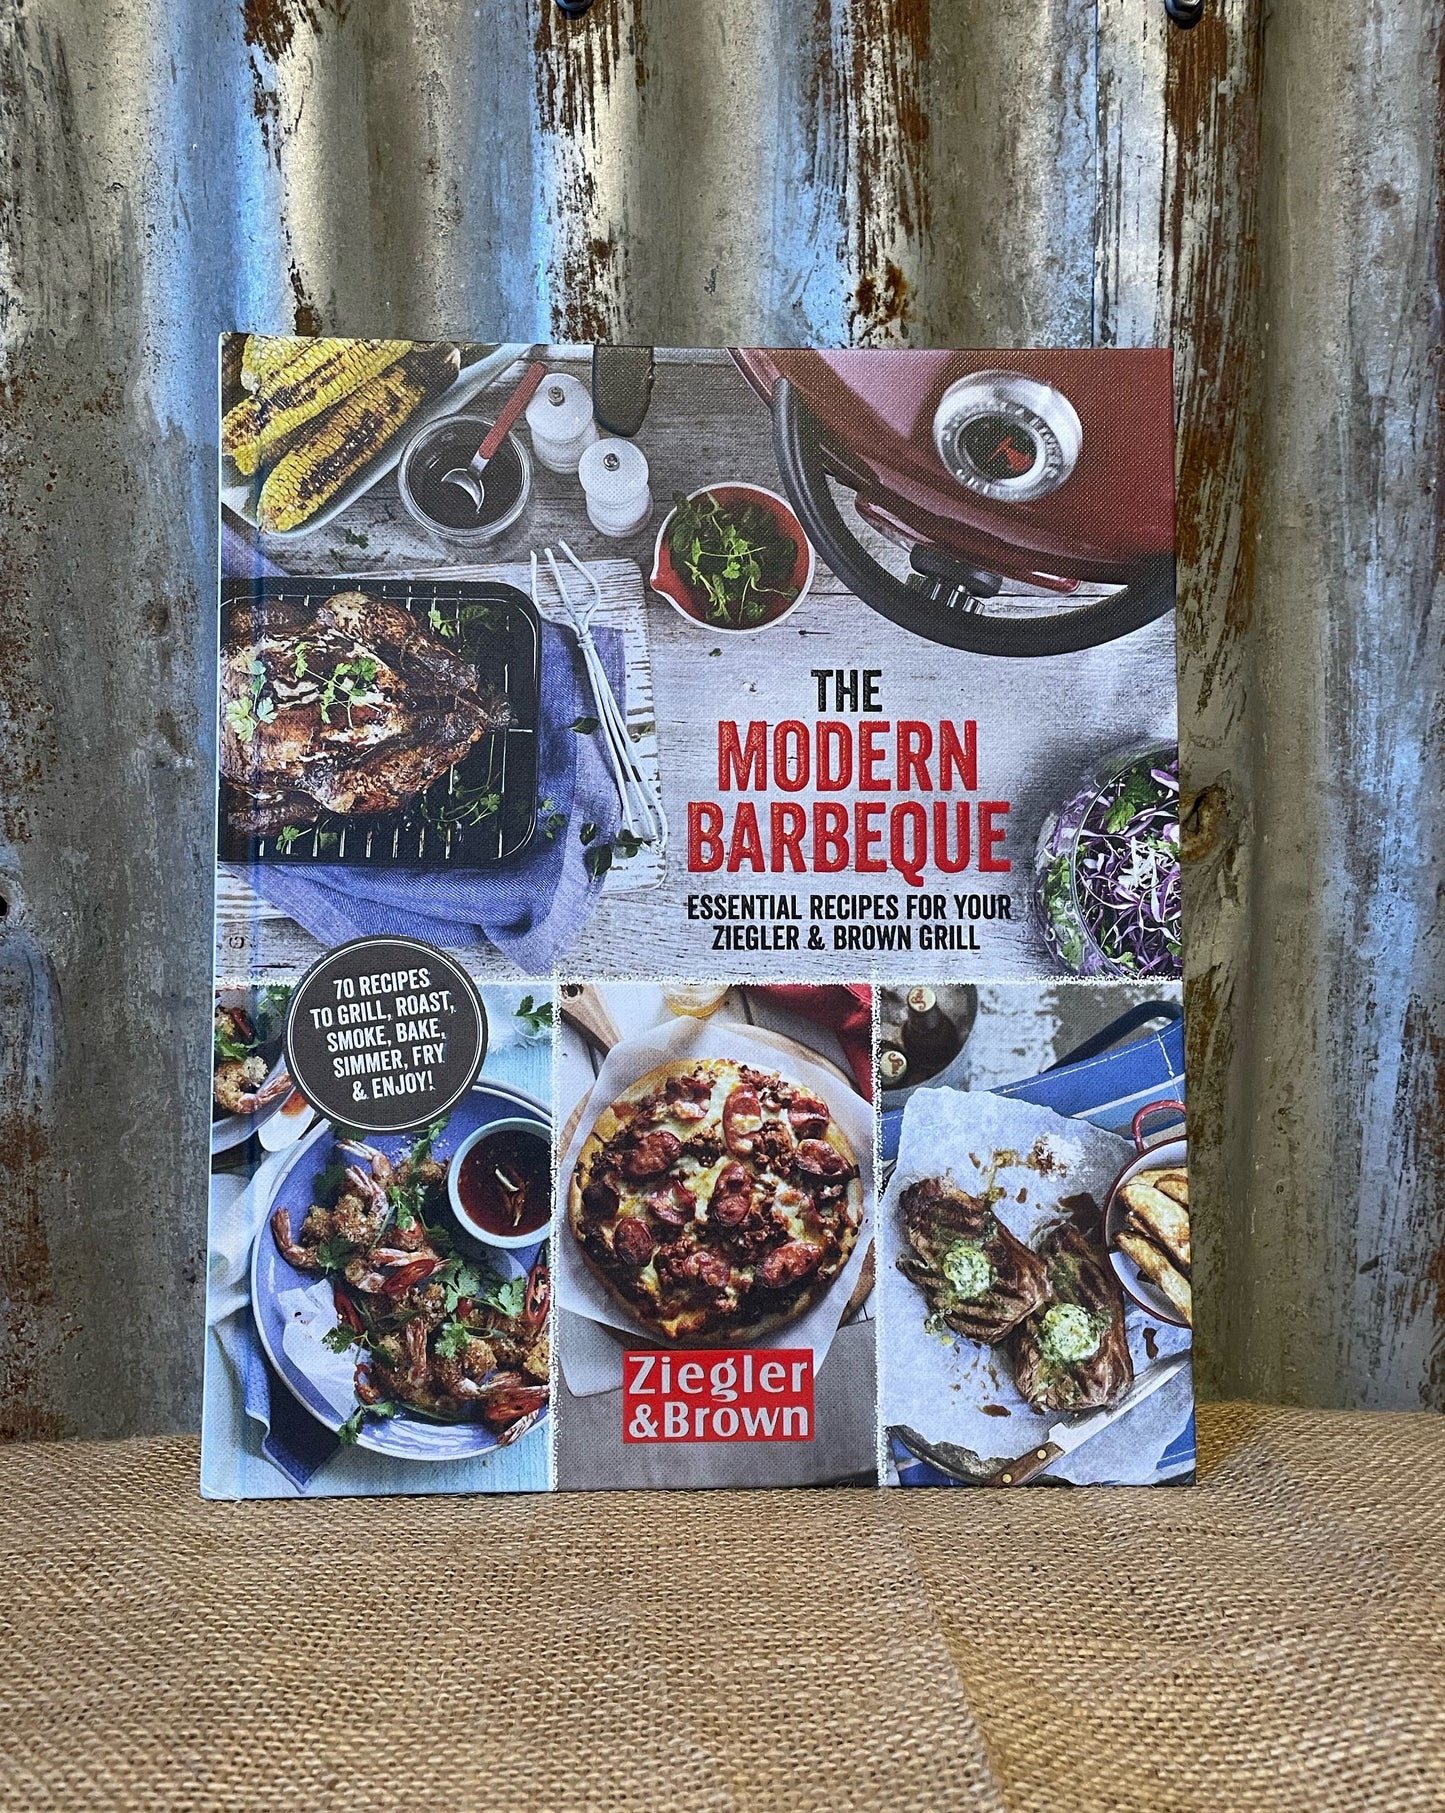 The Modern Barbeque Cook Book - Essential Recipes for your Ziegler & Brown Grill